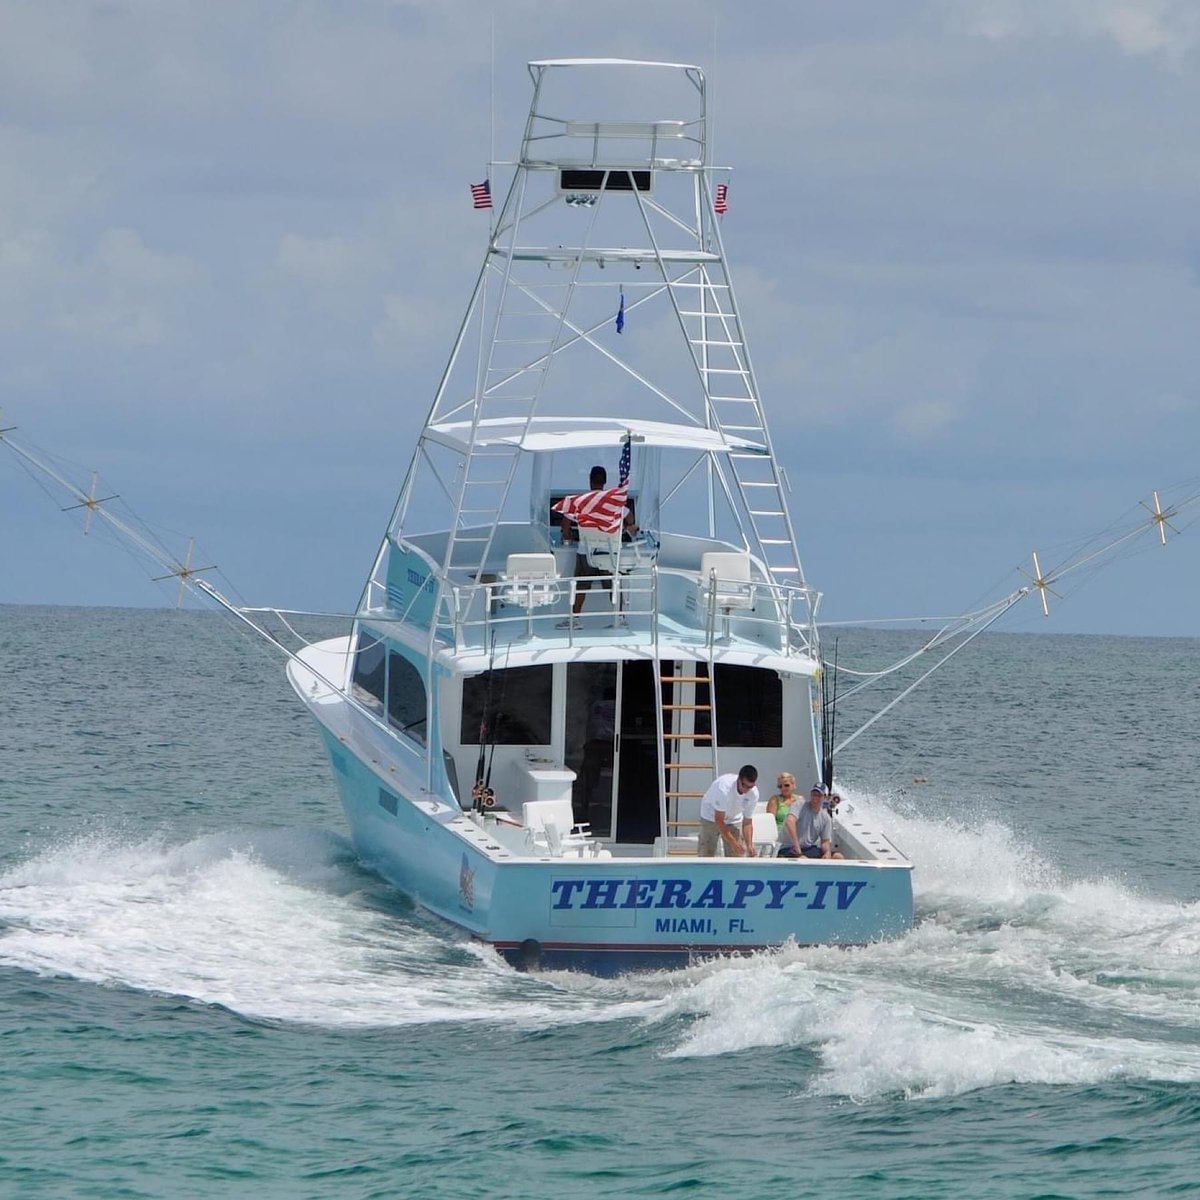 Recline and Relax with Miami Deep Sea Fishing During the Holiday Season

Learn more: postly.app/3Kbf

#deepseafishing #miamibeachfishing #therapy4 #miamifishing #miamiadventure #holidayescape